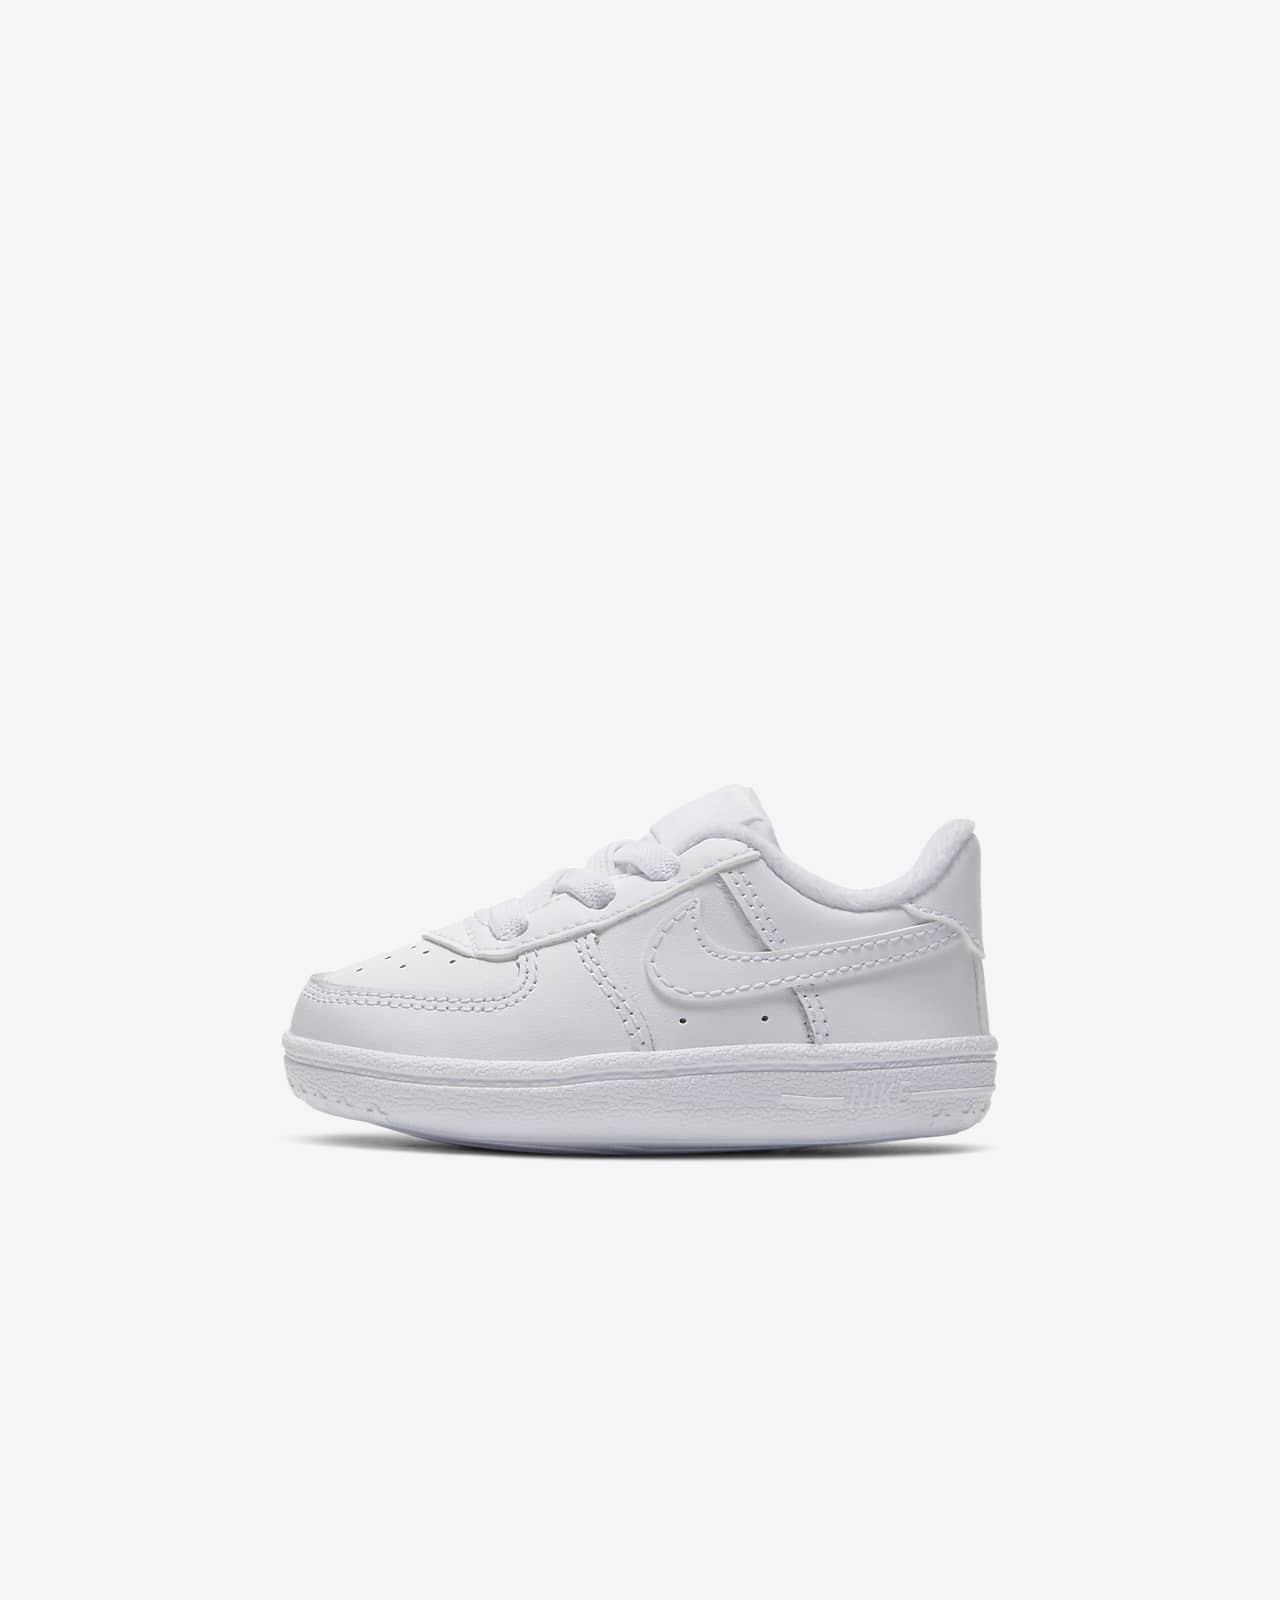 Nike Force 1 Cot Baby Bootie. Nike CA